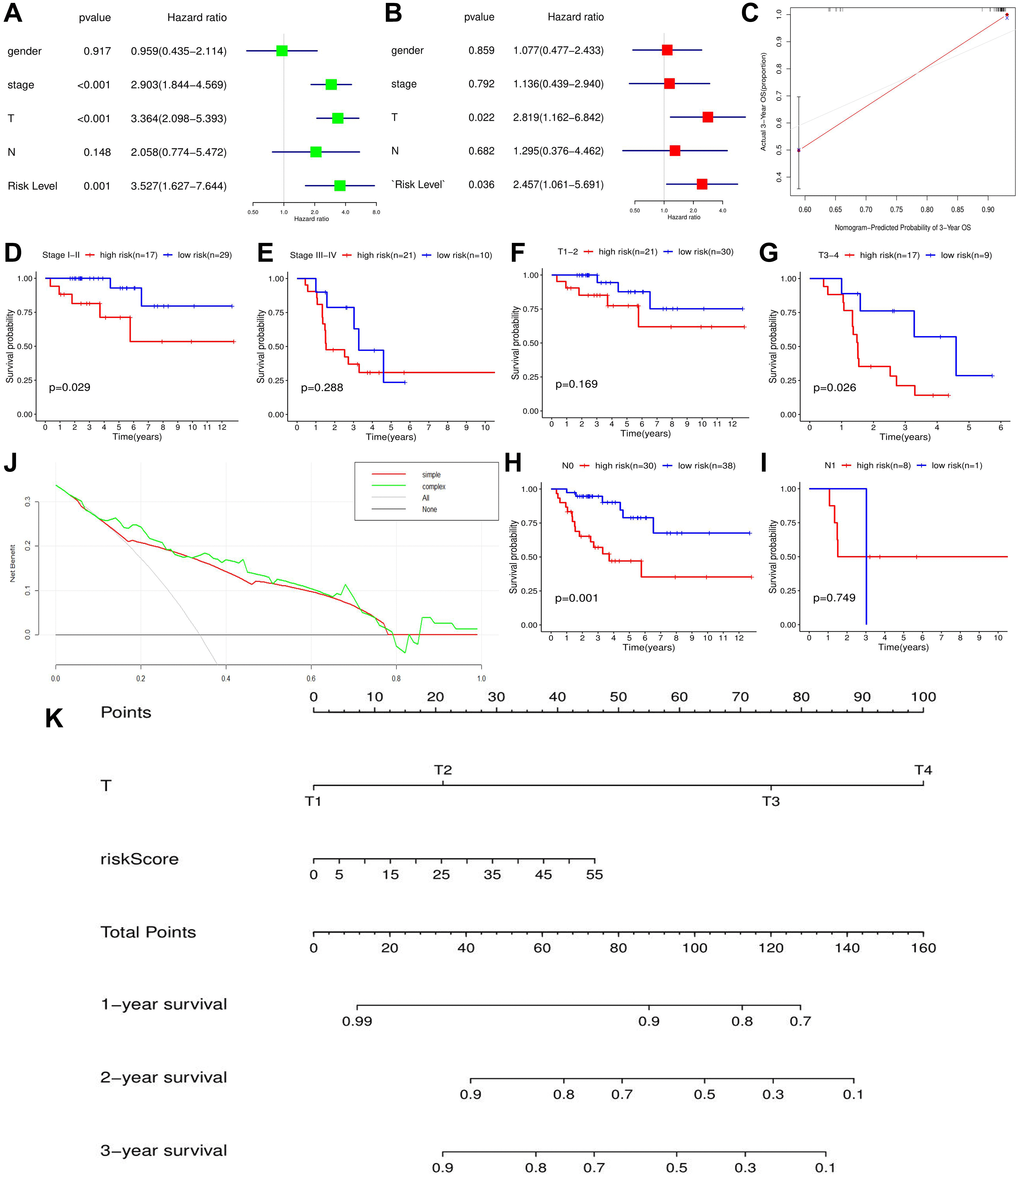 The effect of m6A-related risk signature on ACC prognosis in TCGA cohort. (A) The results of cox univariate prognostic analysis. (B) The results of multivariate prognostic analysis. (C) The calibration curves. (D–I) The prognostic differences of ACC patients with the same clinical subgroups. (J) The DCA curve of m6A risk signature. ‘Simple’ curve (red) represents the prognostic model composed of age and clinical stage. ‘Complex’ curve (green) represents the prognostic model composed of age, clinical stage and m6A risk score. (K) The nomogram is used to predict the OSR of ACC patient at 1, 2, 3 year. DCA, decision curve analysis.